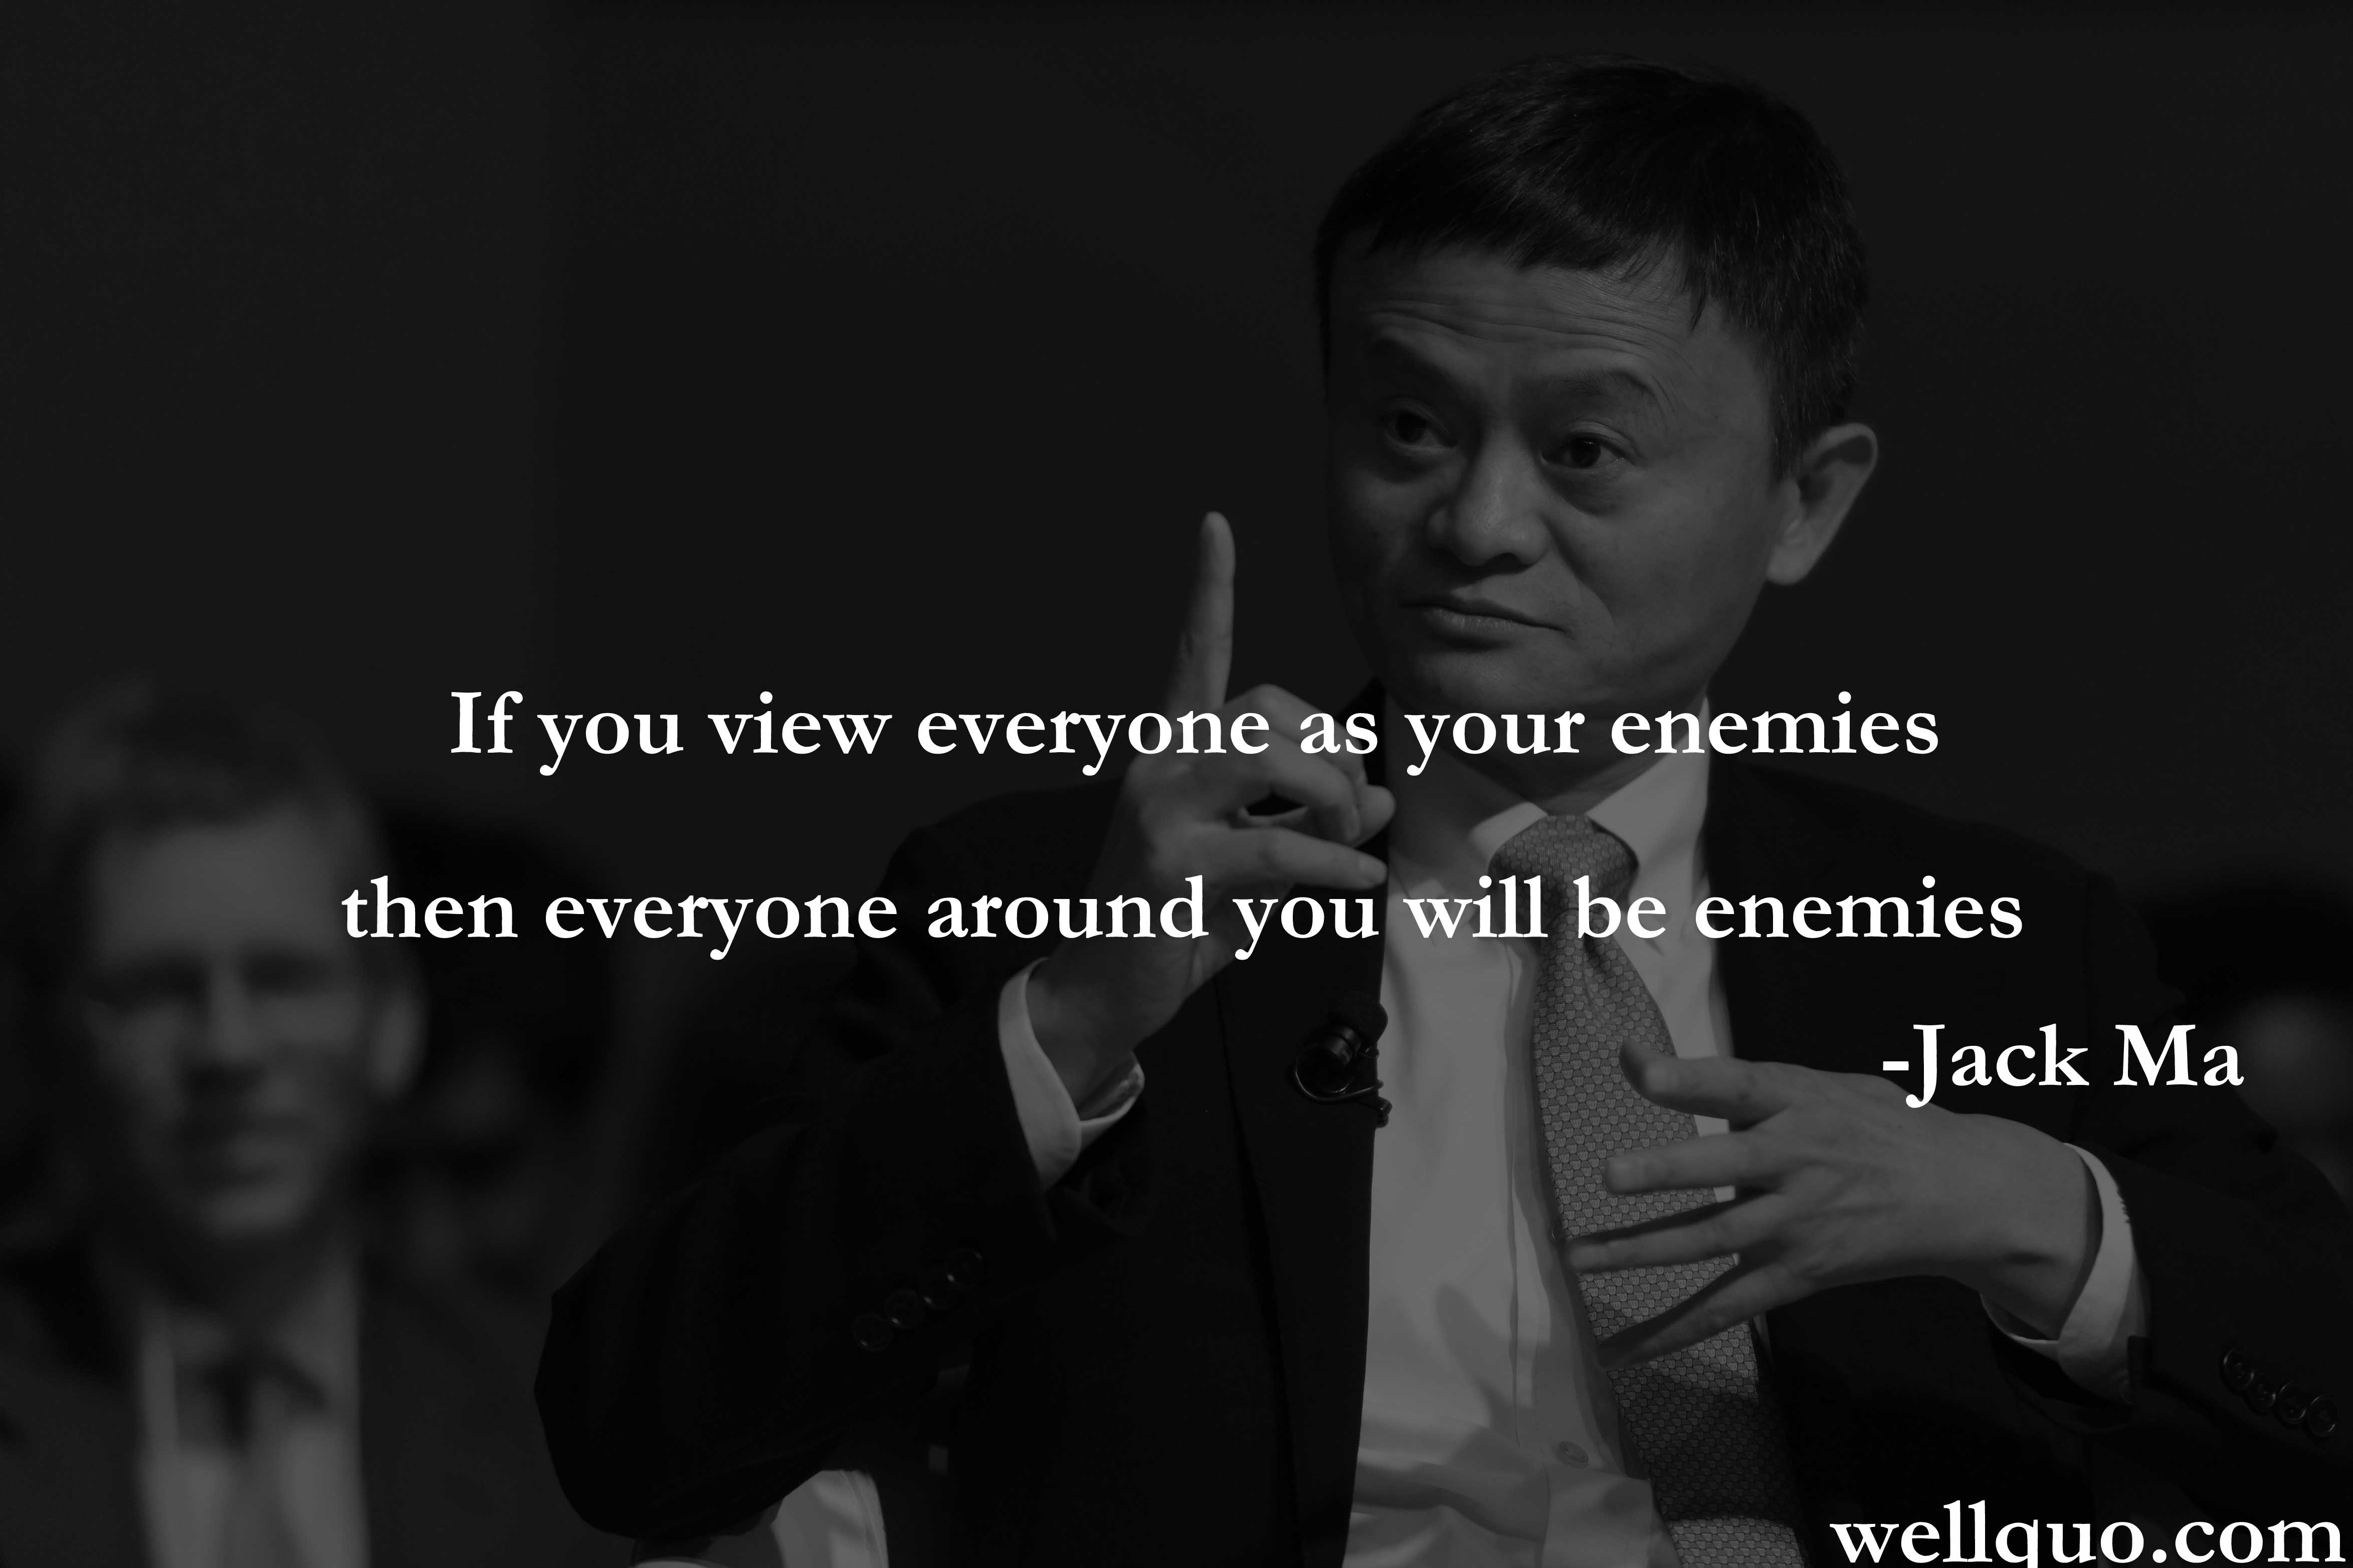 jack ma quotes on enemies